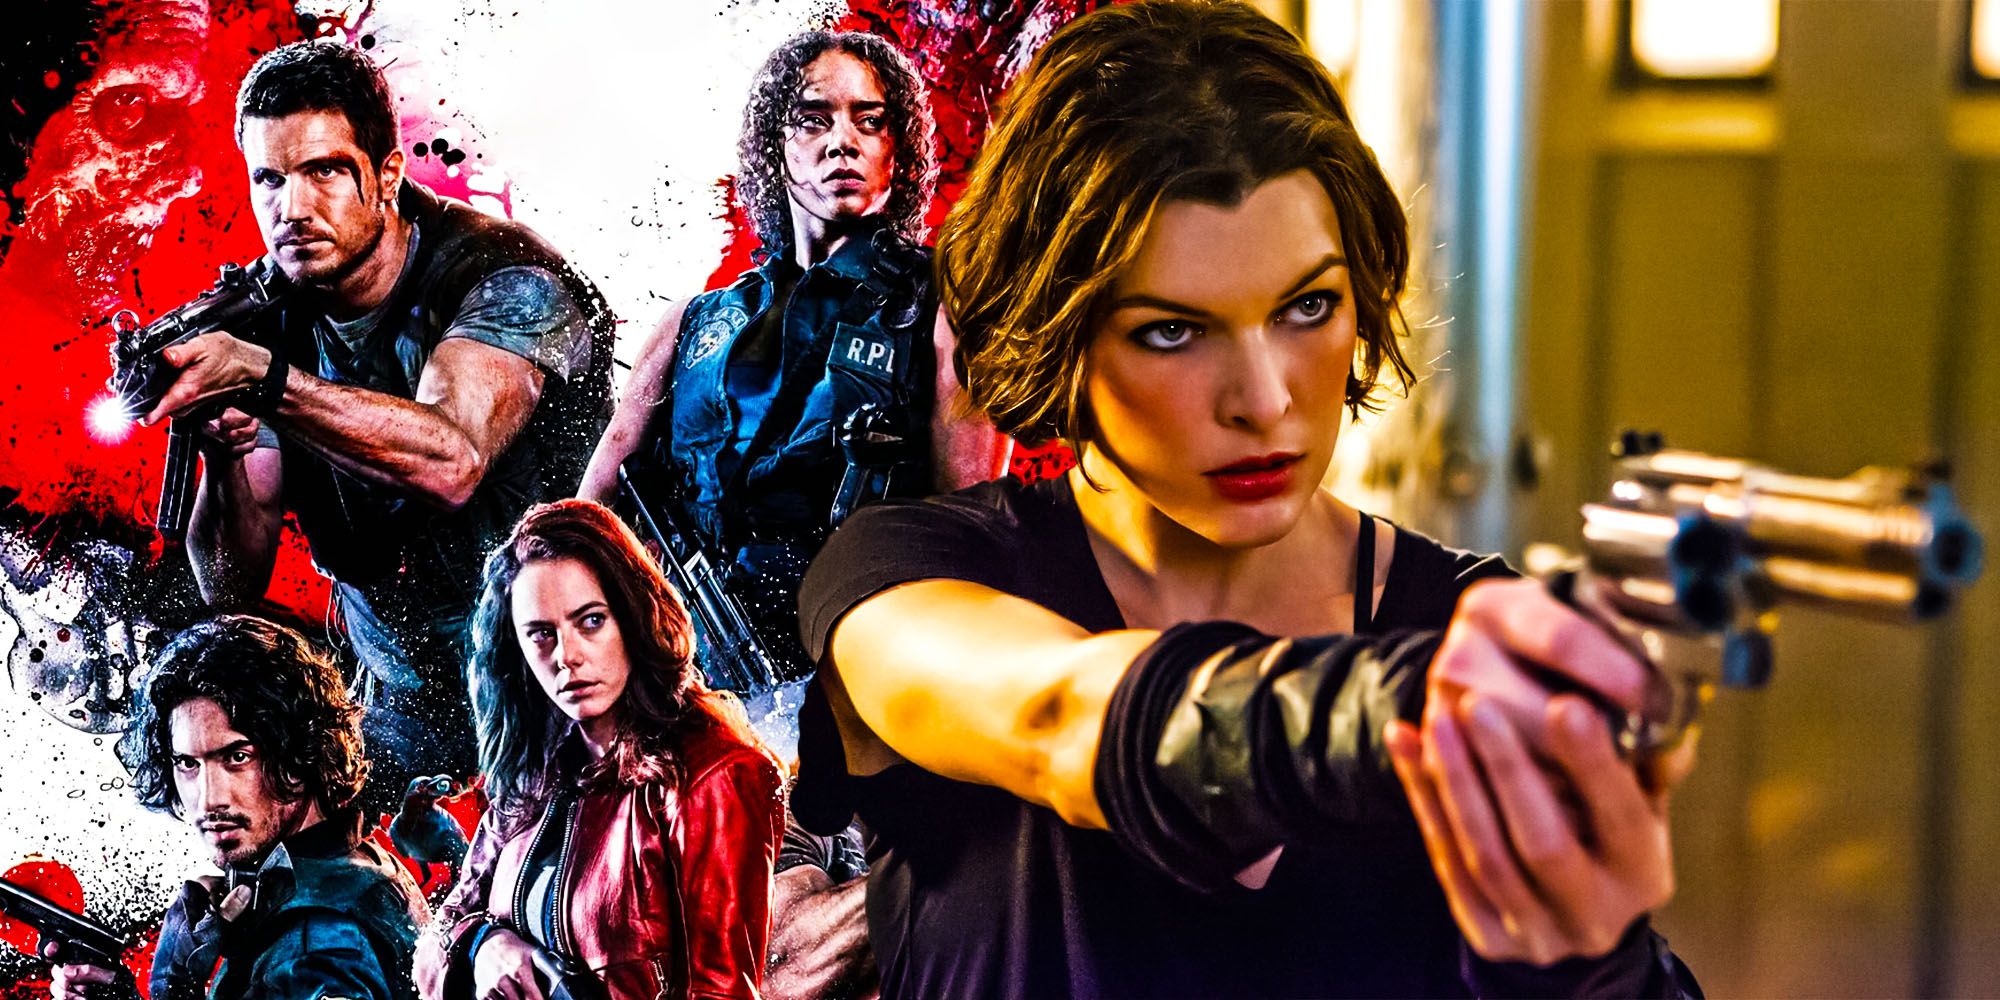 The Success Of Milla Jovovichs Resident Evil Movies Doomed The Horror Reboot